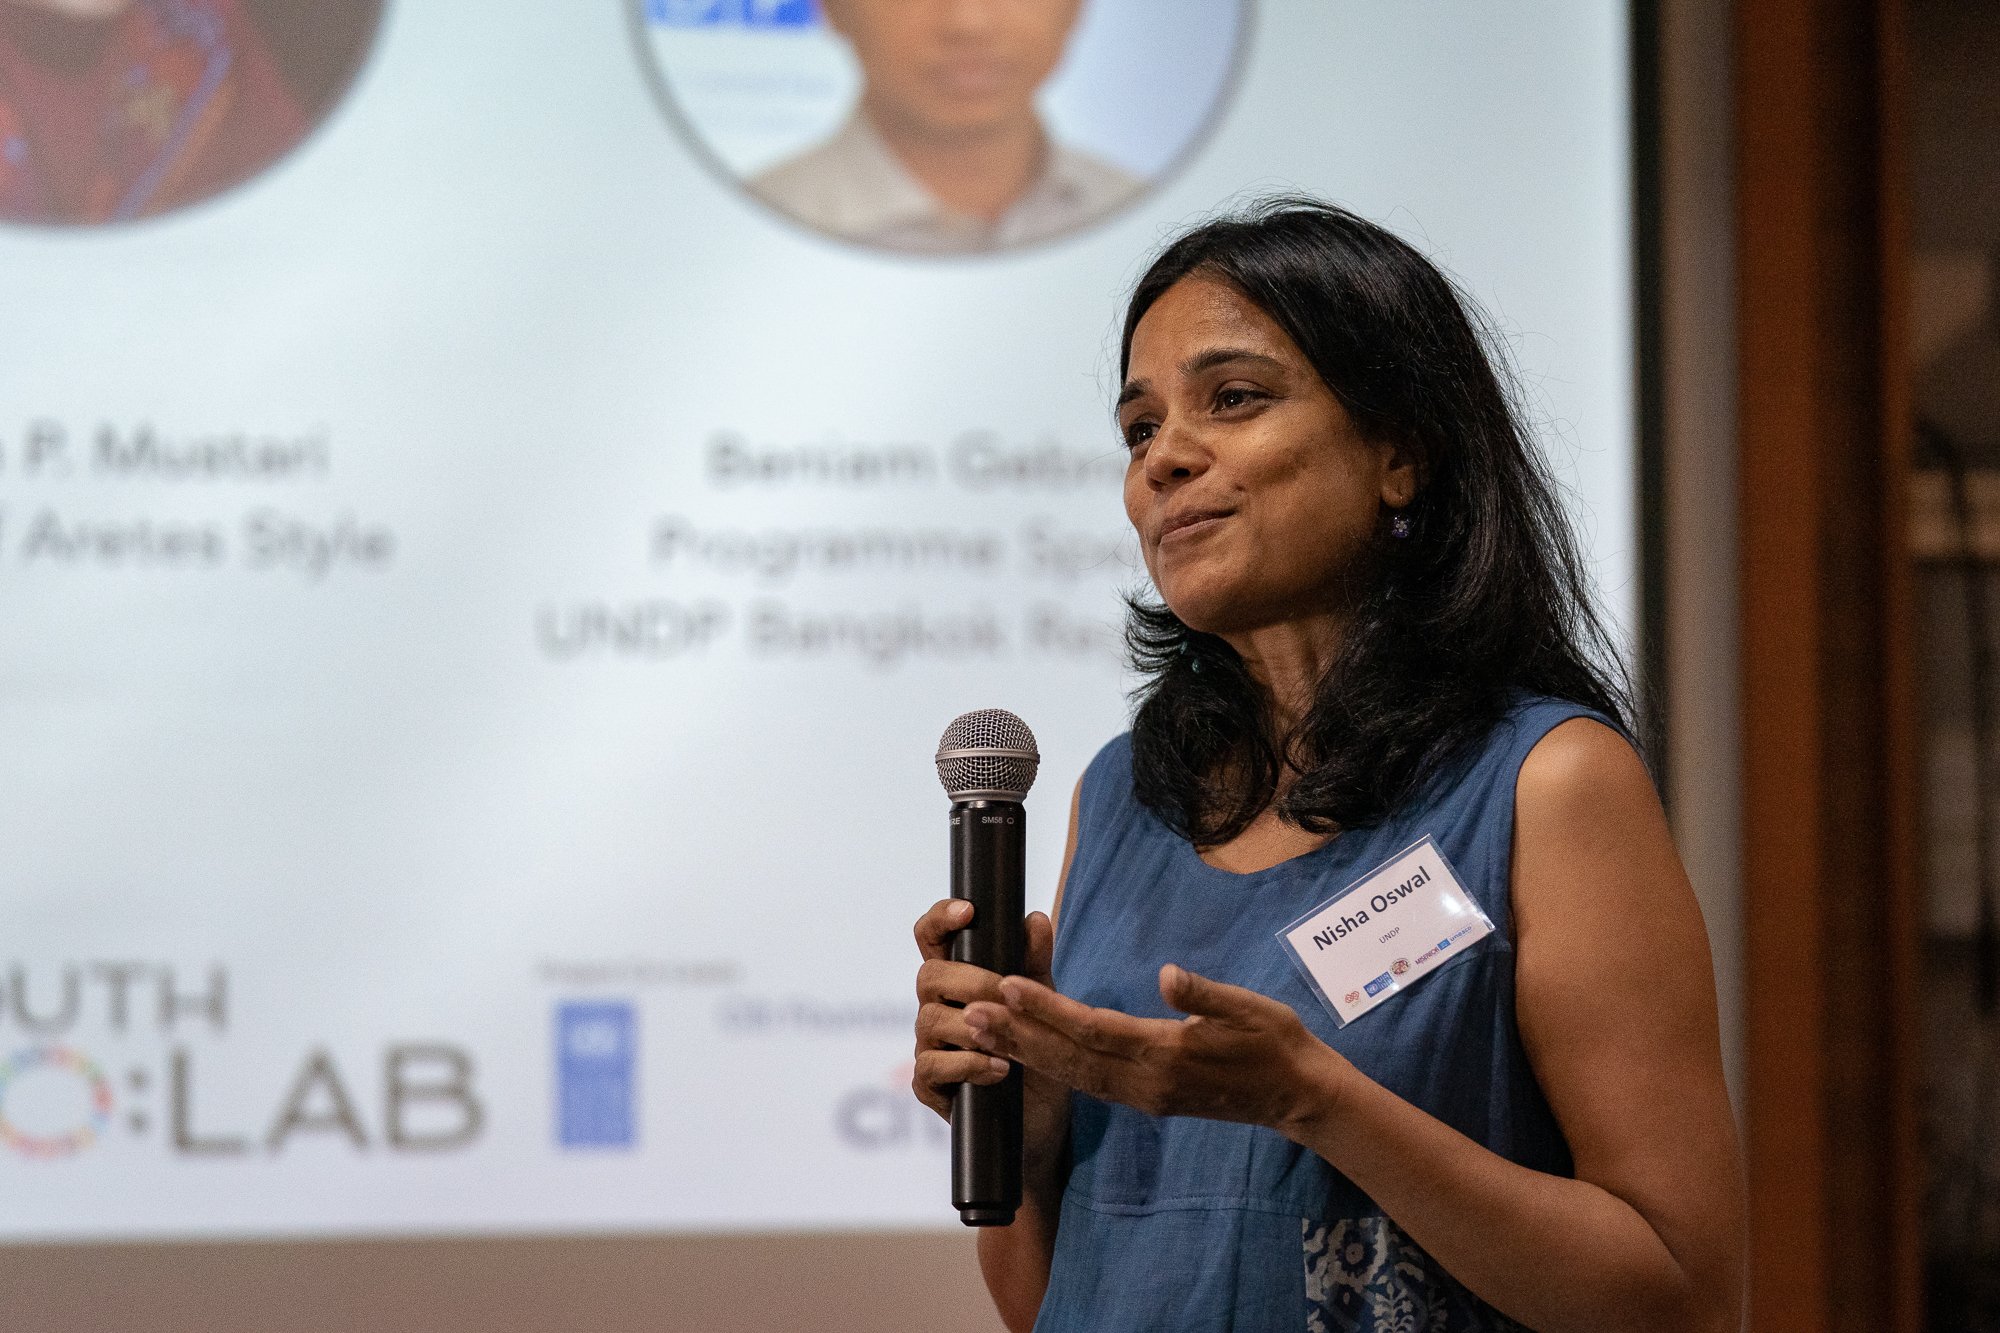 A female participant presents at the CO:LAB conference